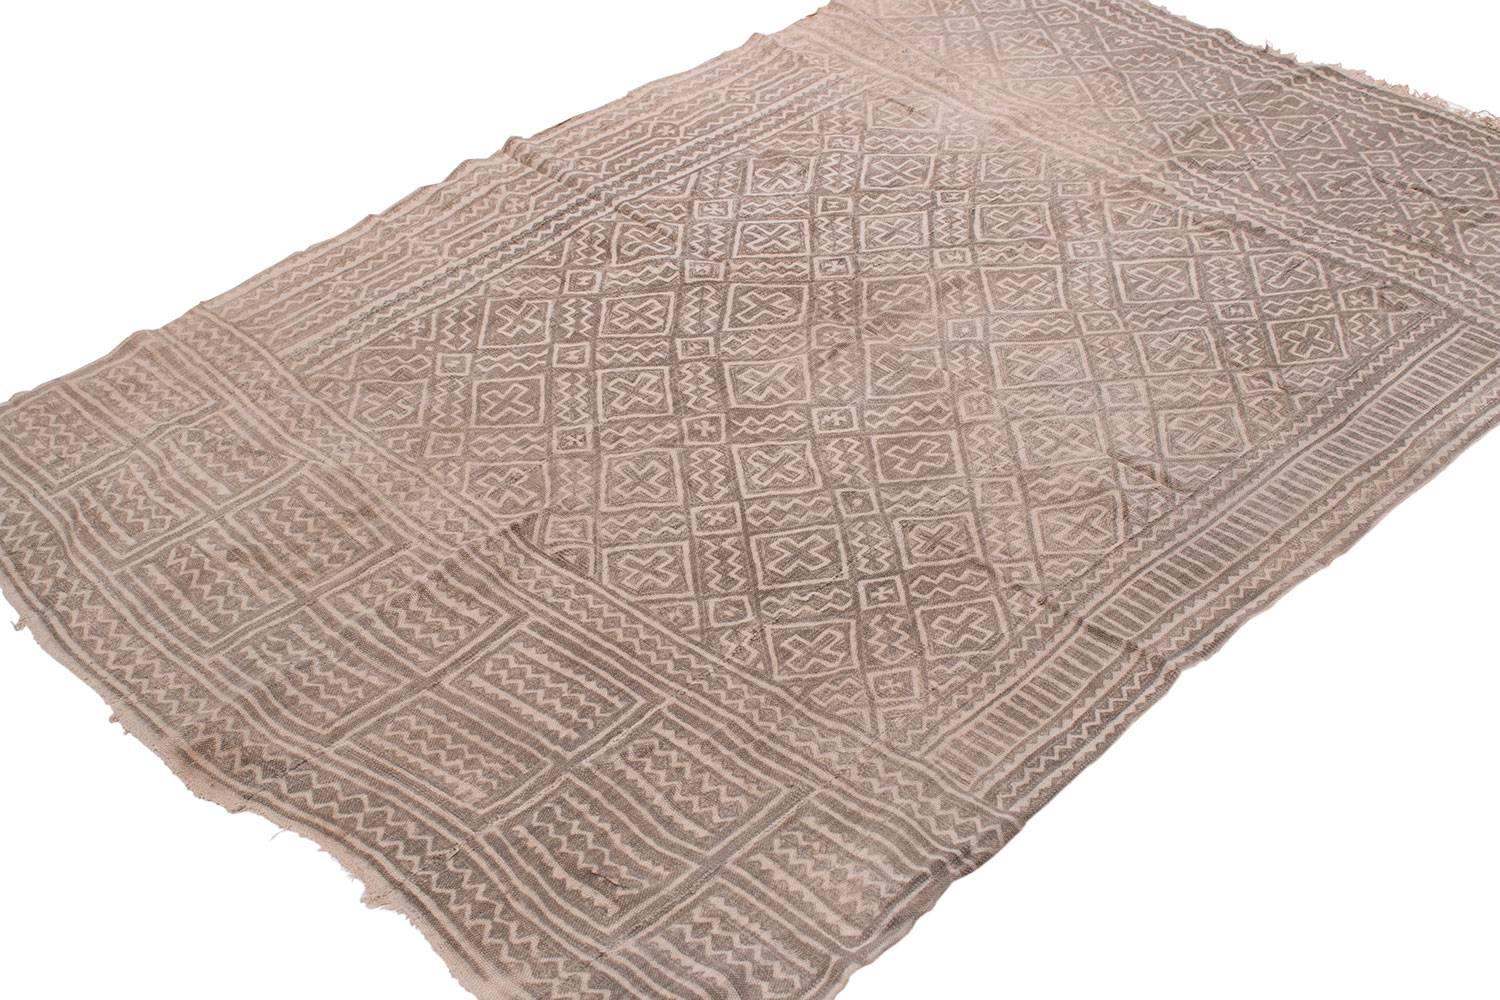 This mud cloth was made circa 1980s and was made from handwoven strips of cotton. This mud cloth comes from Mali and made by the Bamana tribe. The cotton is very soft. The pattern has intriguing subtle changes throughout that are not apparent at